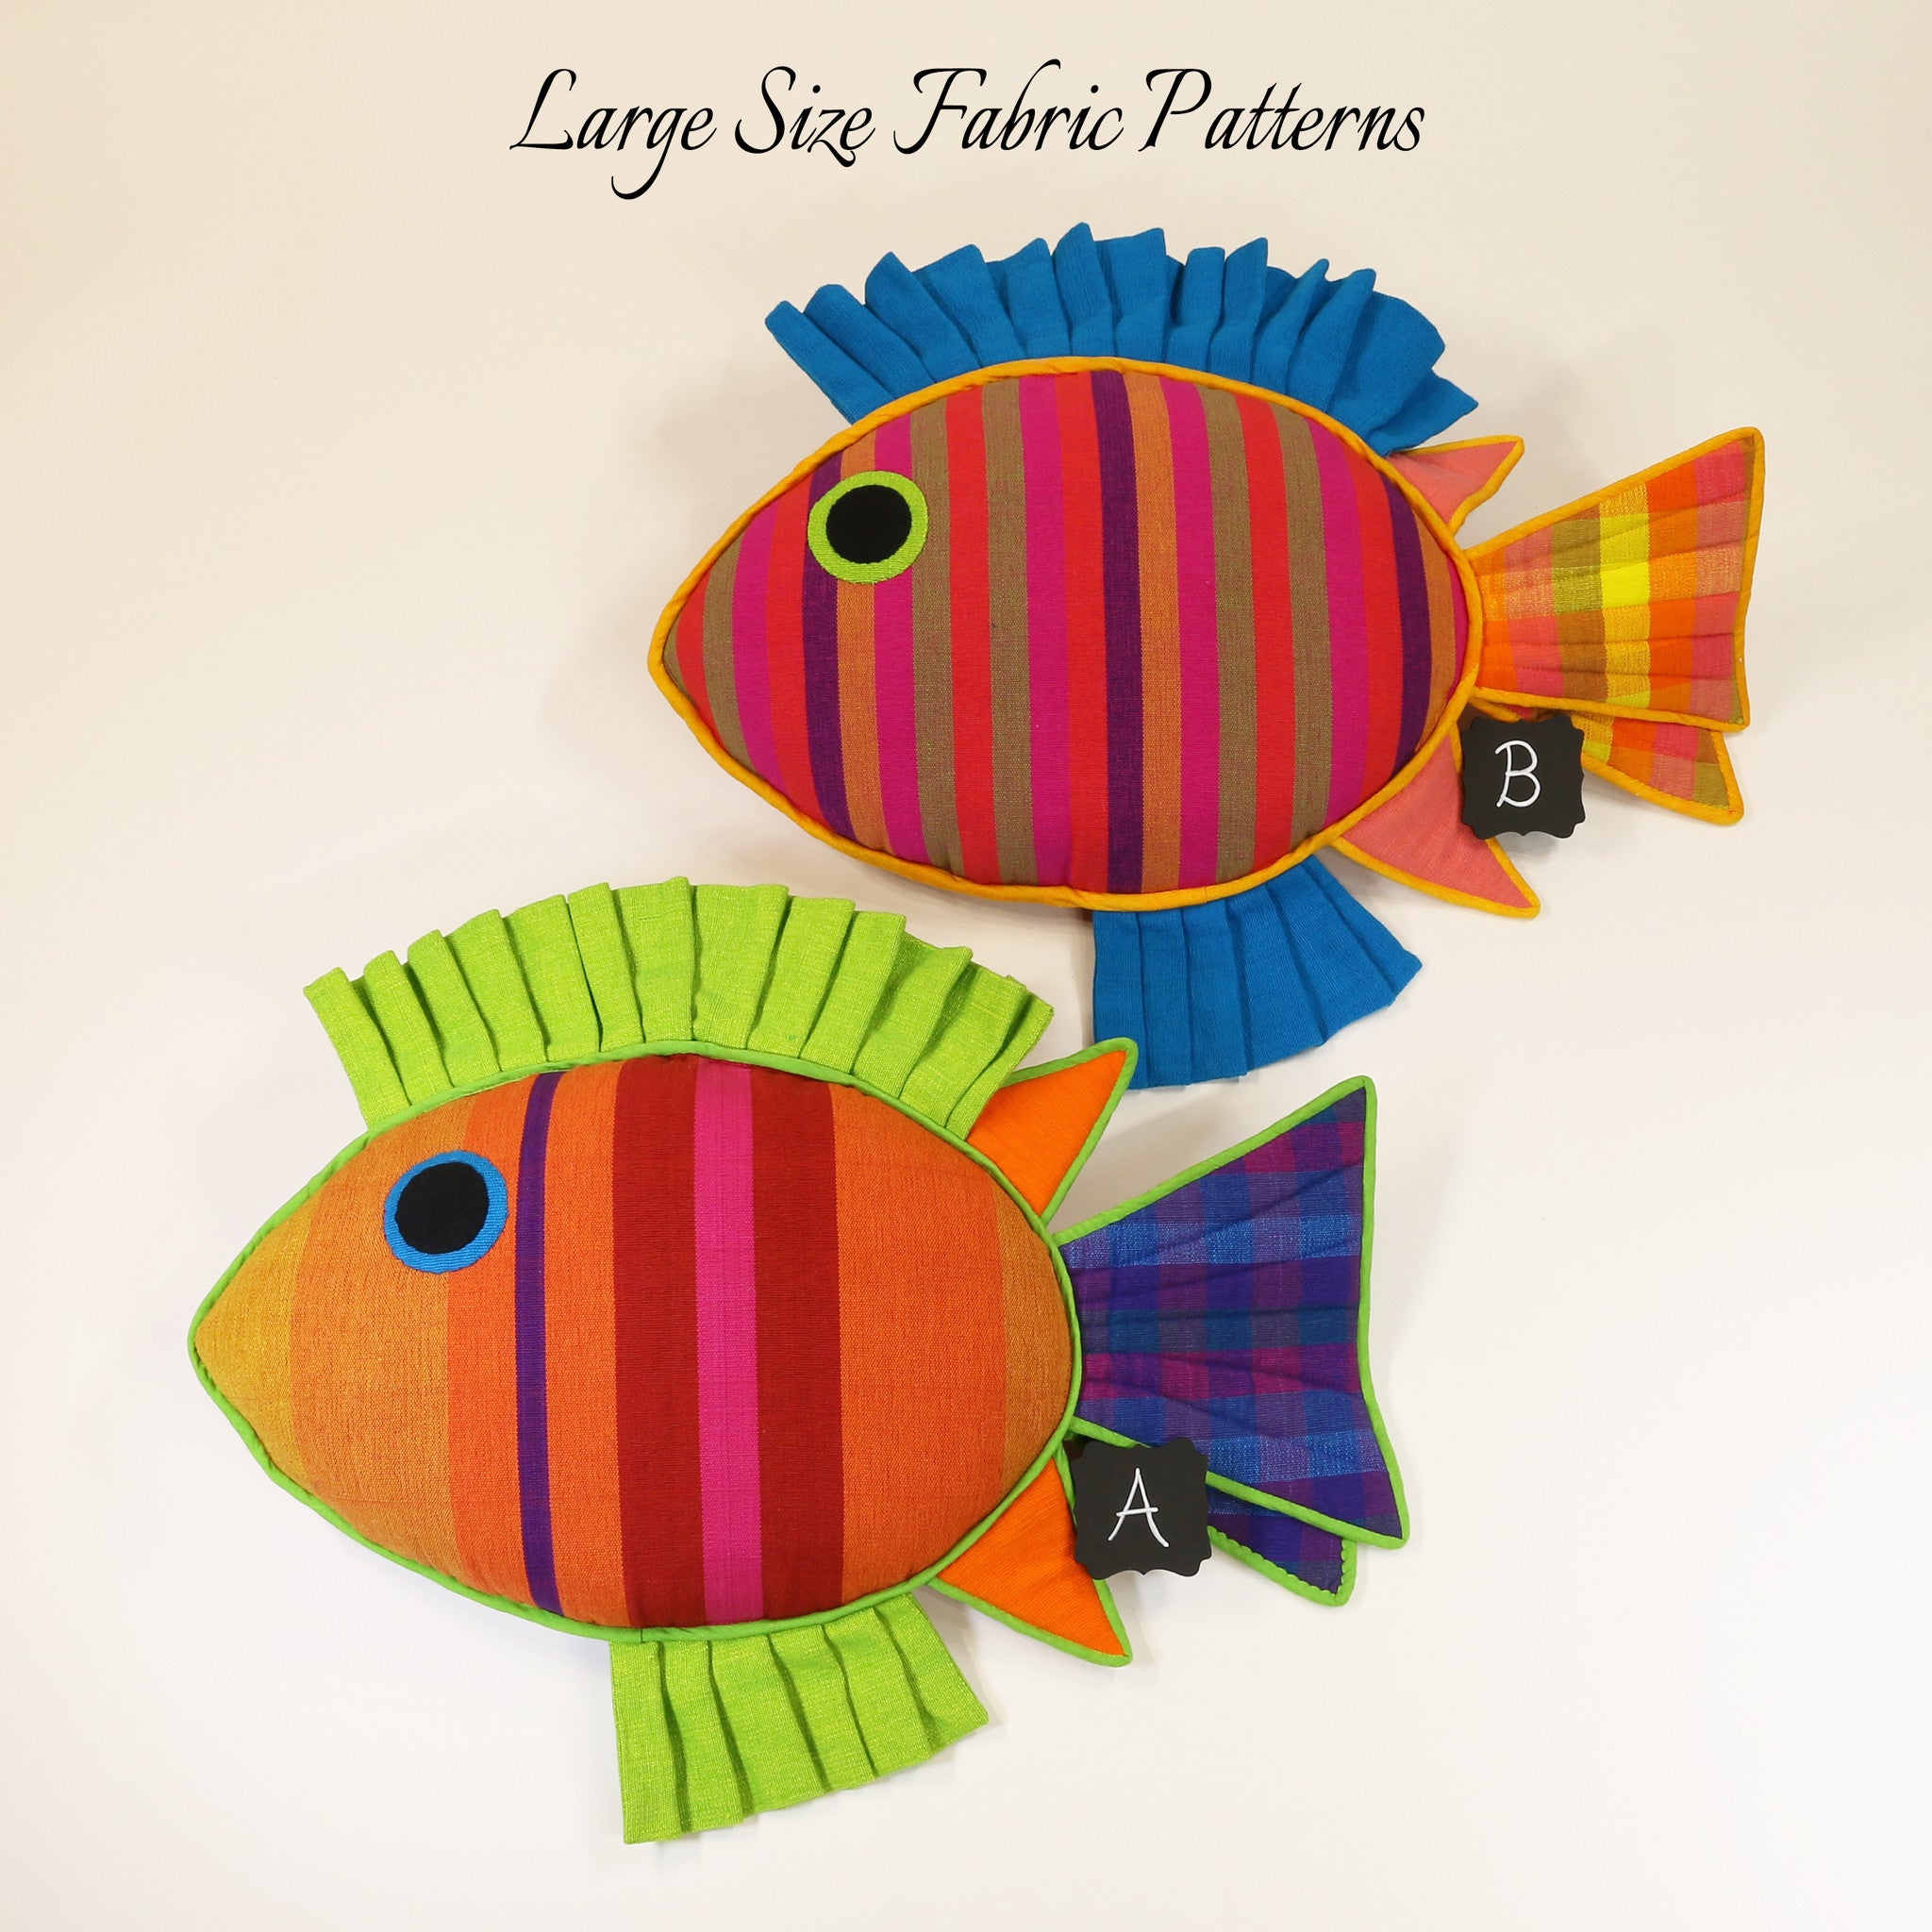 Molly, the Rabbit Fish – all large size fabric patterns shown